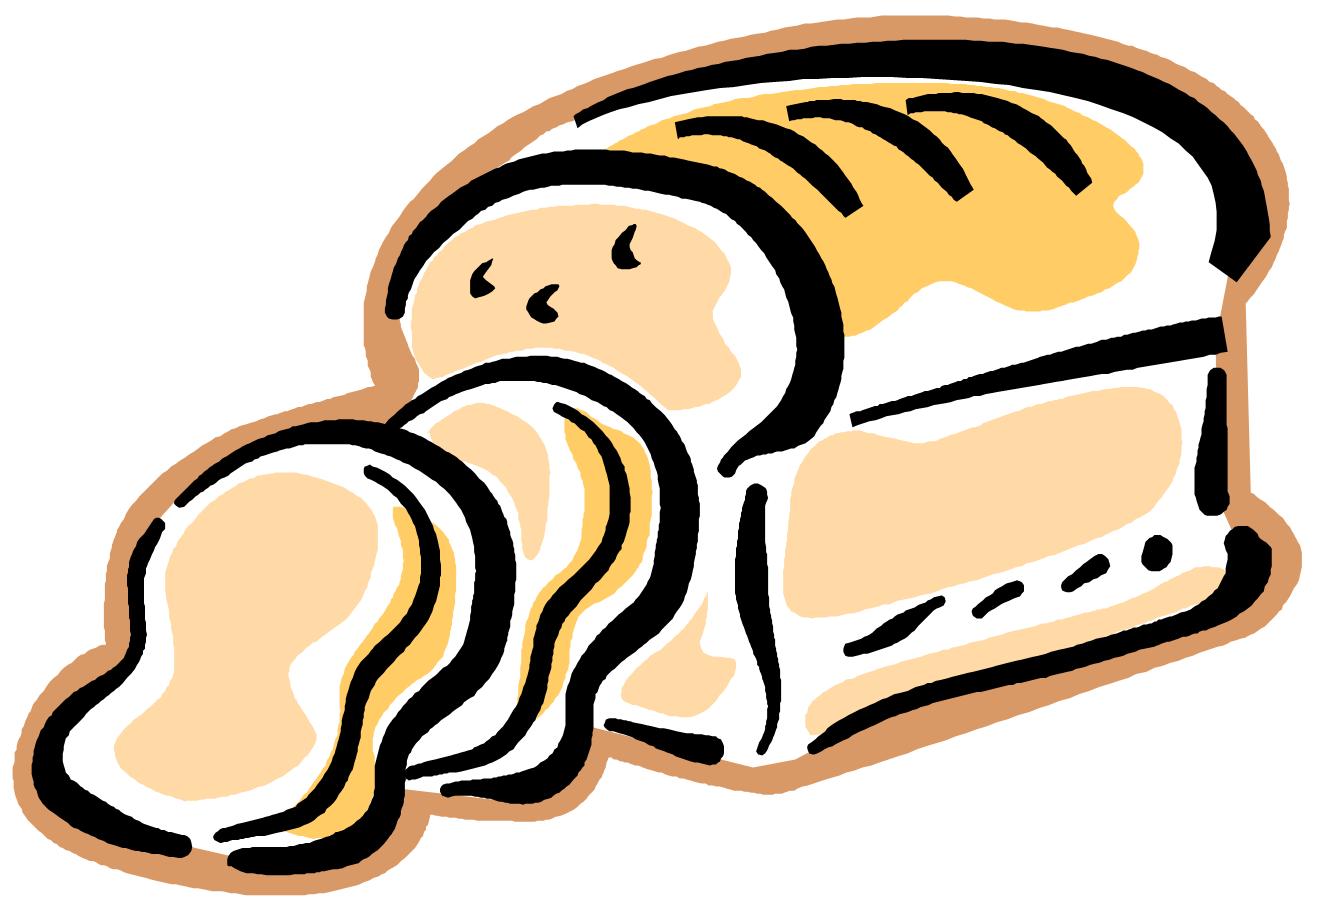 Bread clipart free download clip art on 3